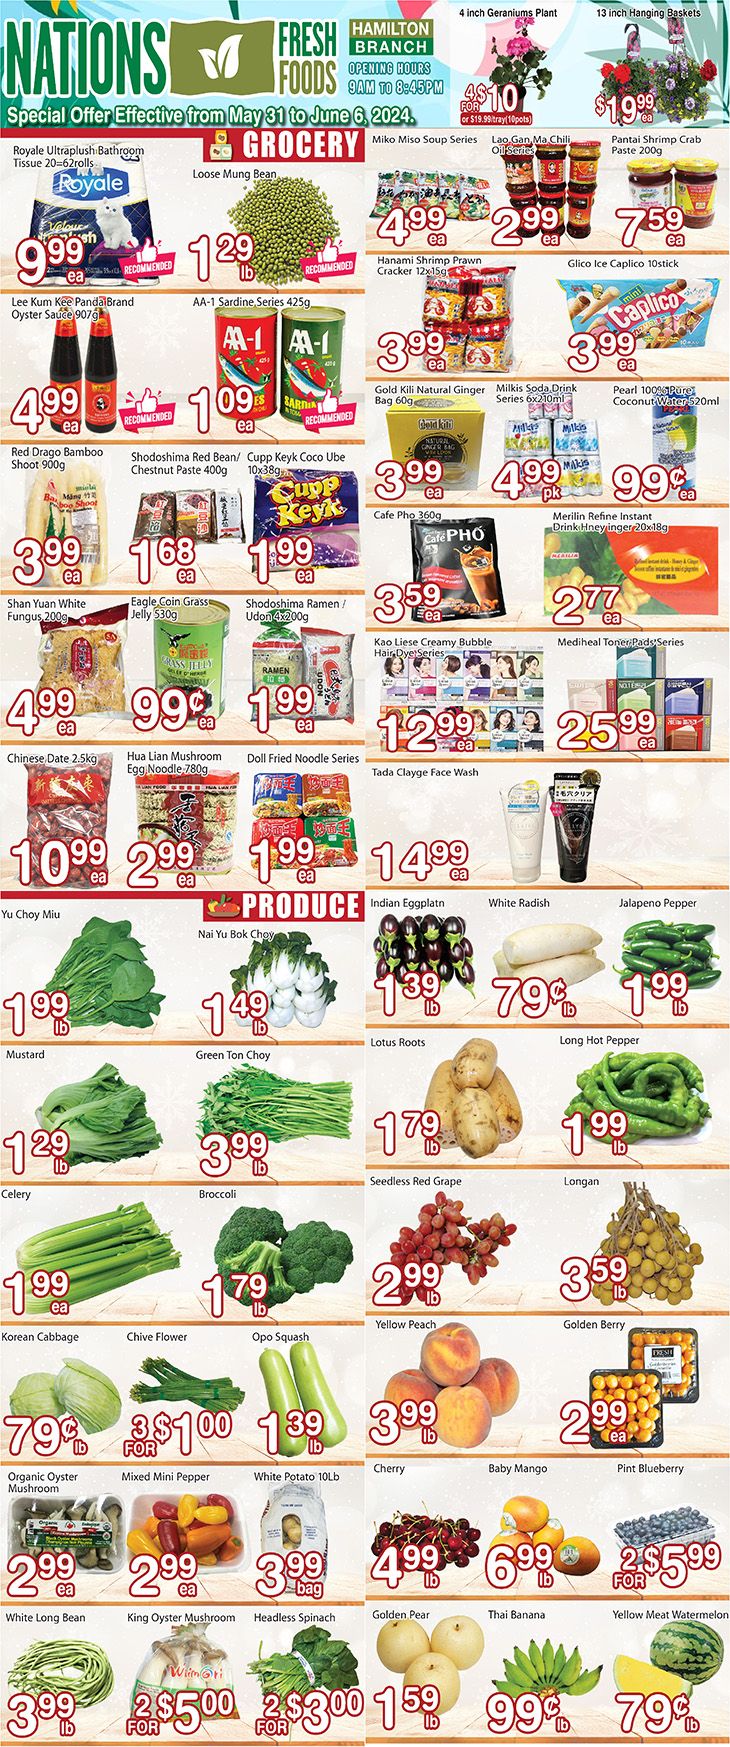 Nations Fresh Foods - Hamilton - Weekly Flyer Specials